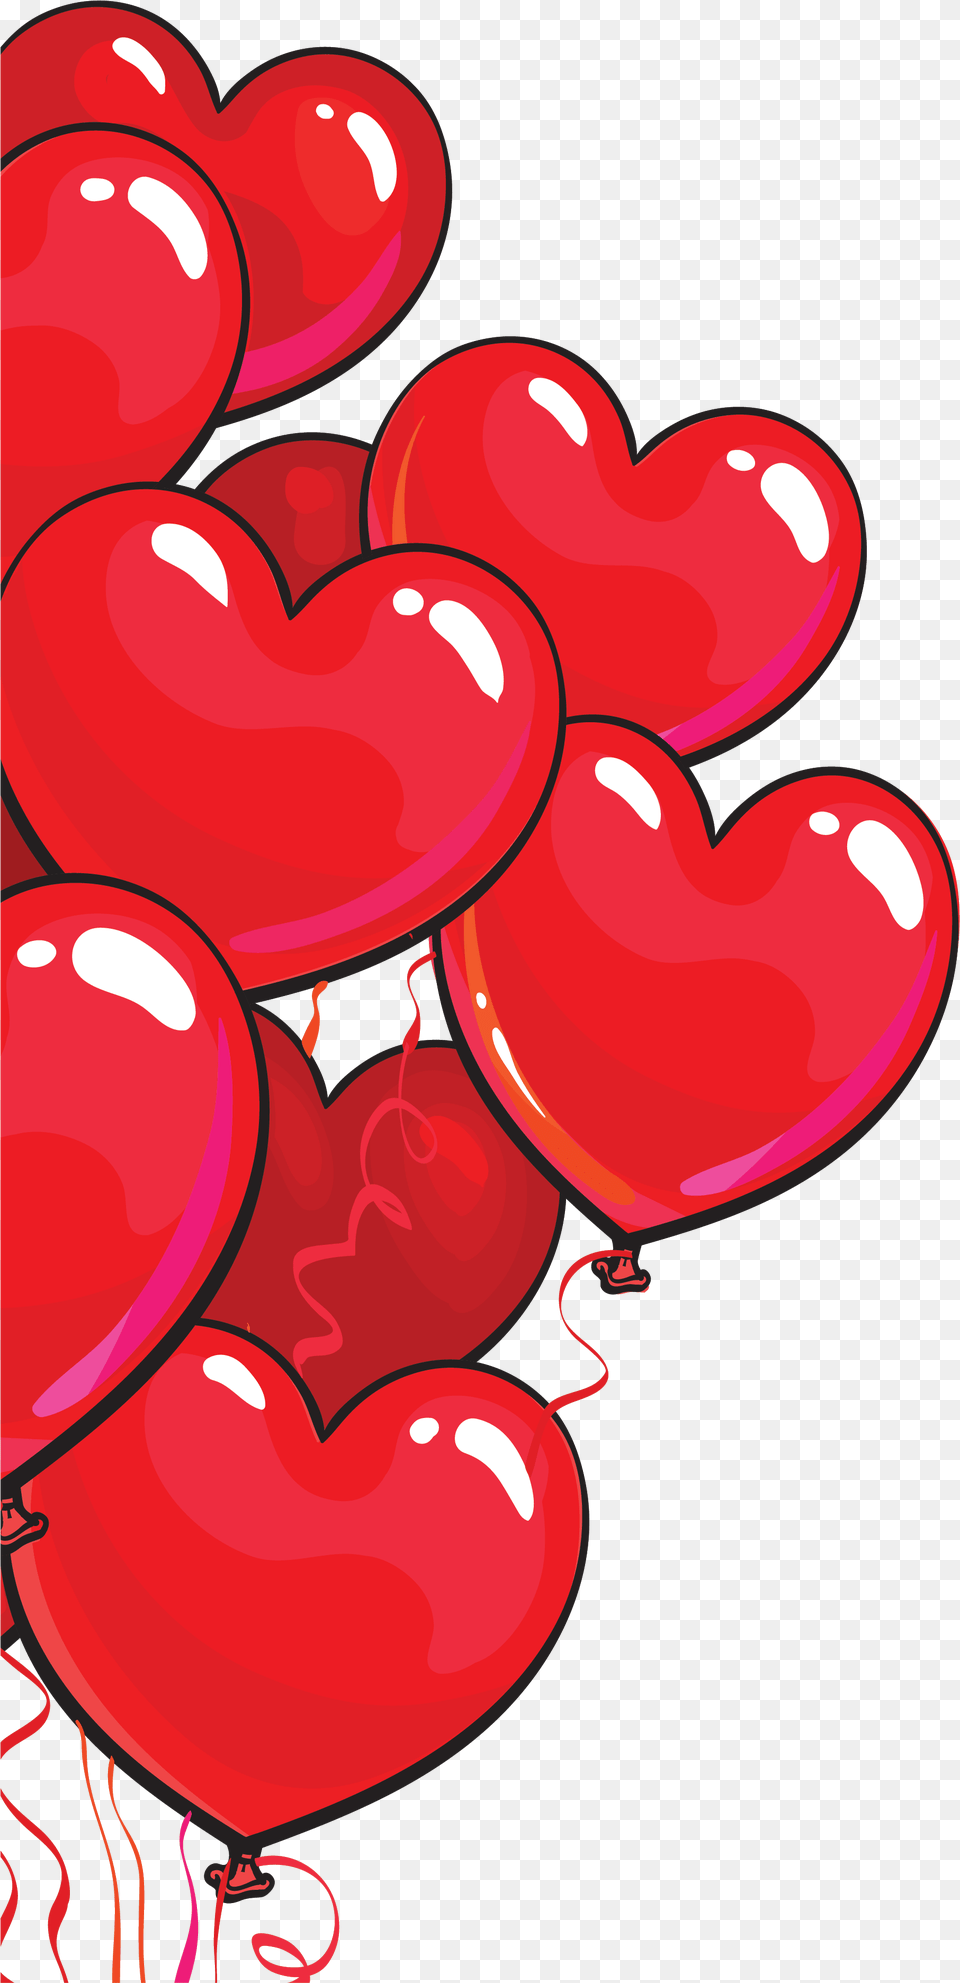 Buy Iphone Xr Clear Case Heart Balloons Transparent 3 Love, Balloon, Dynamite, Weapon Png Image